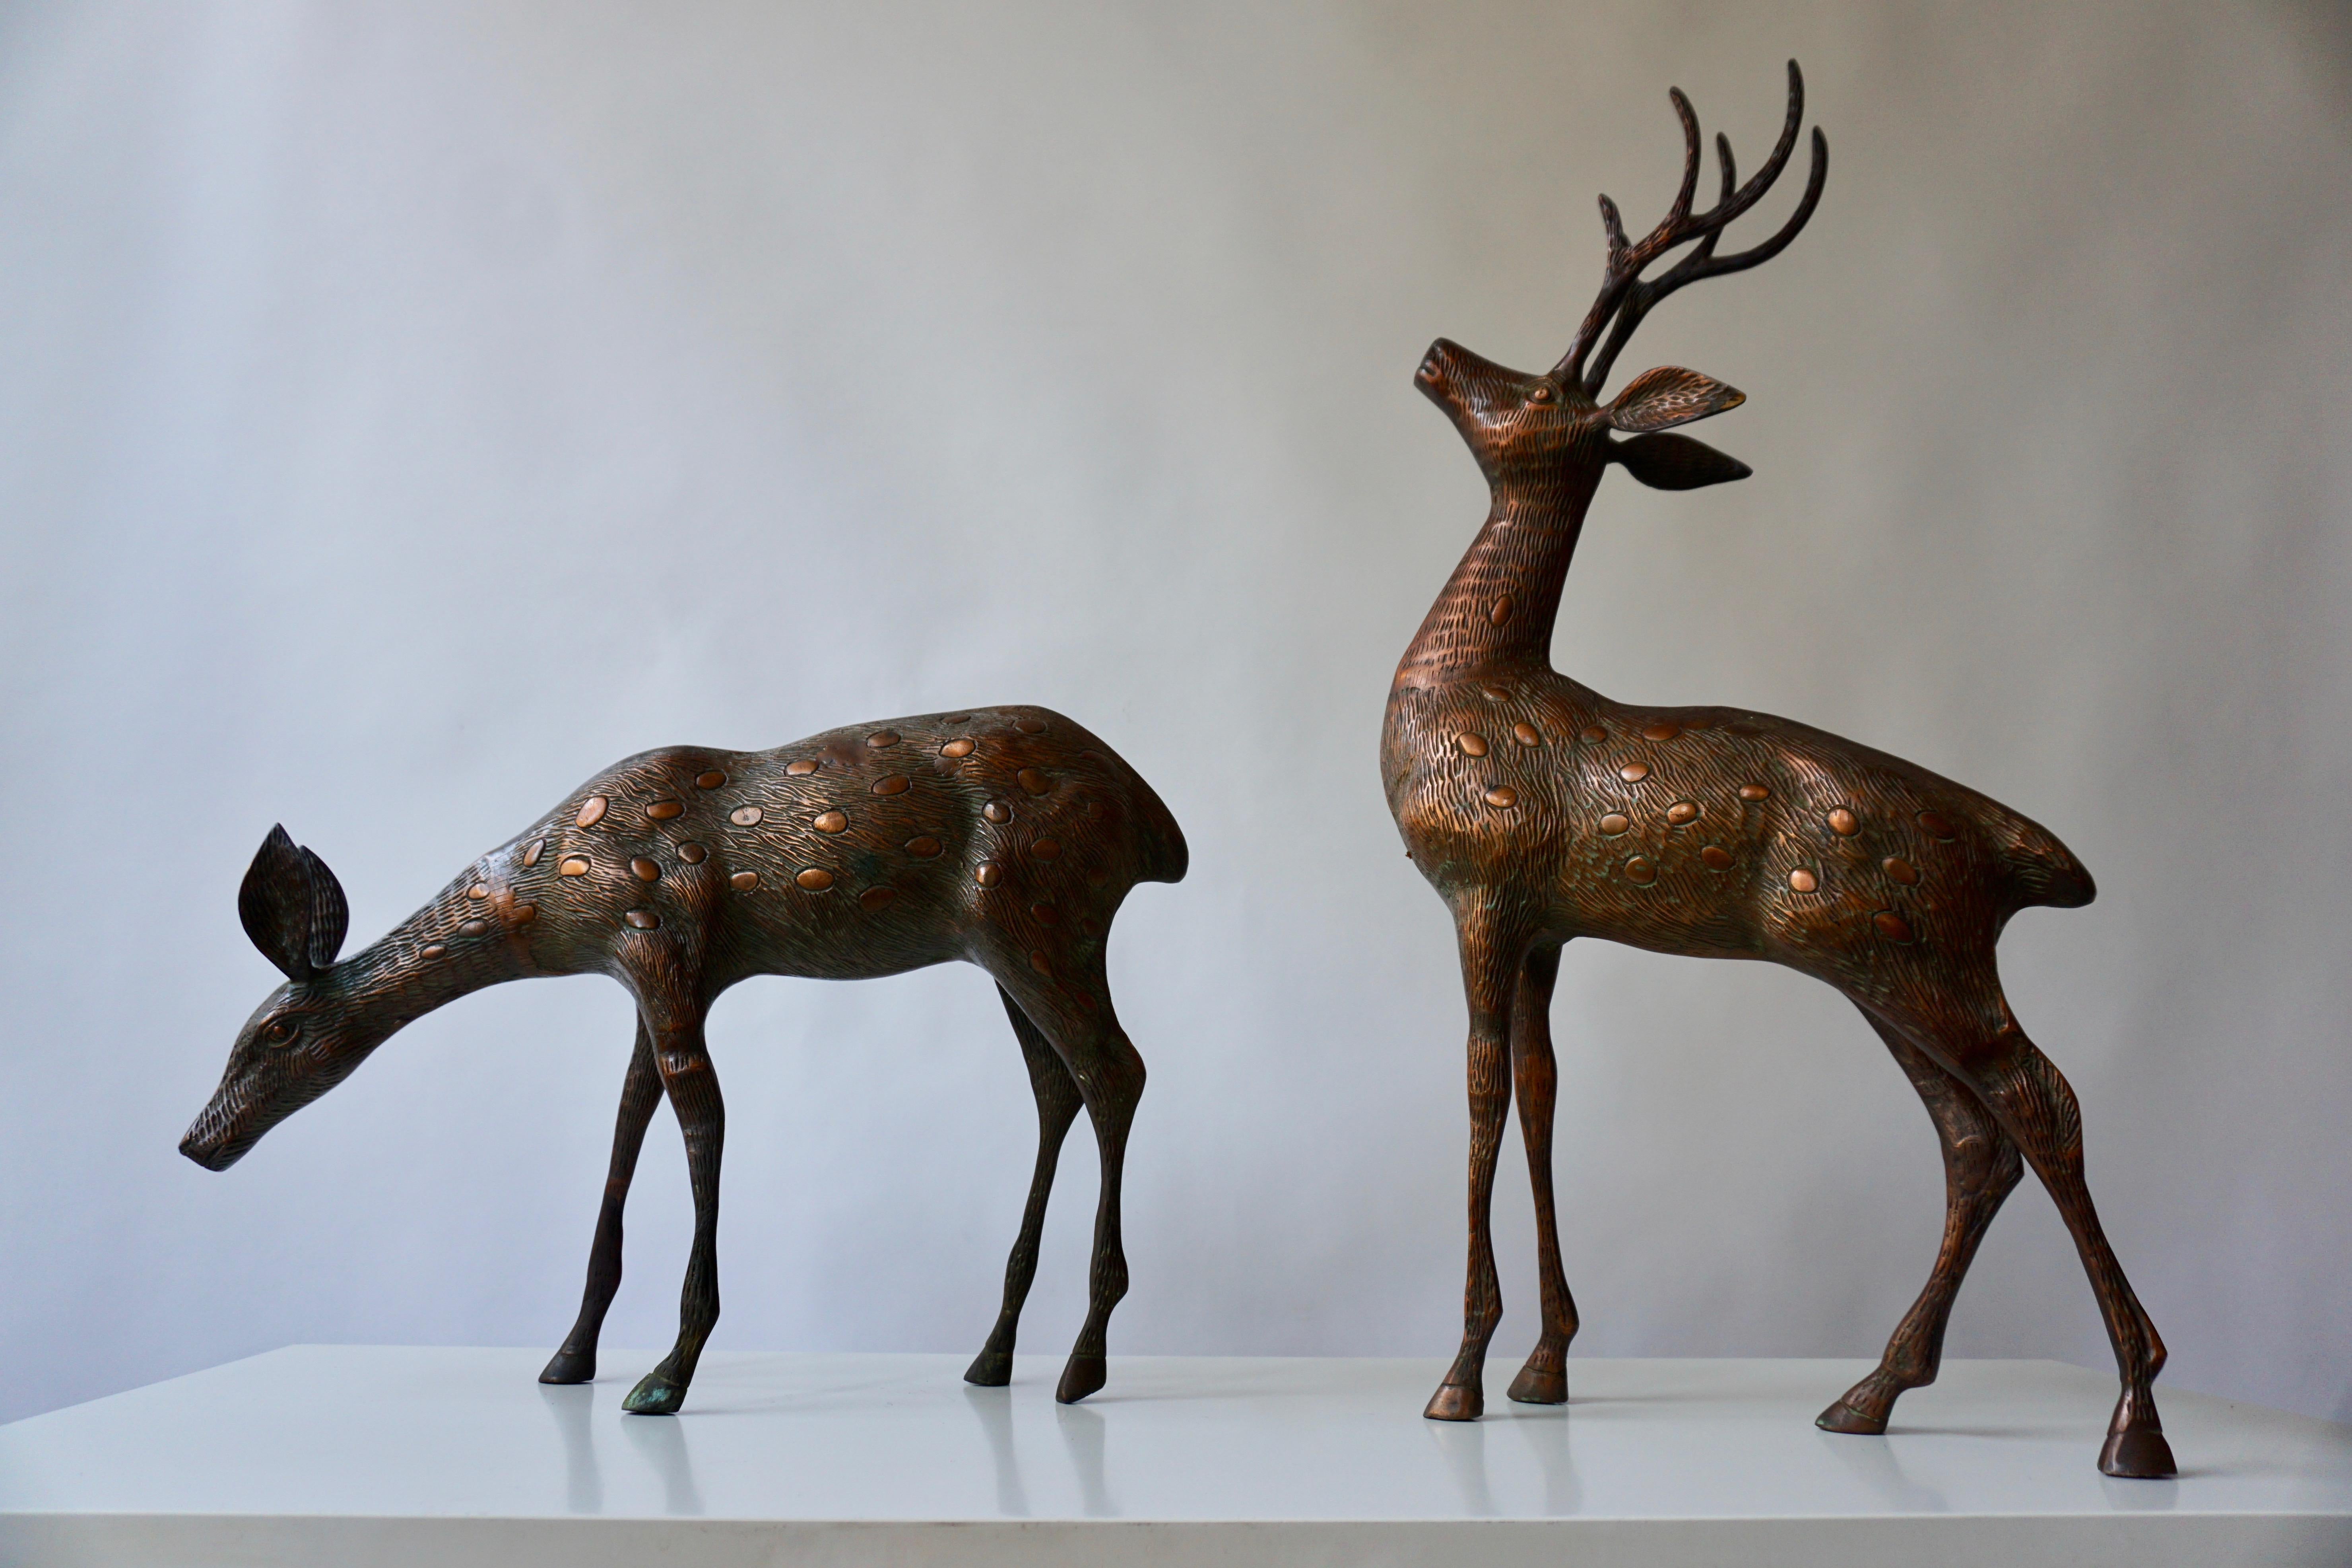 For your consideration is an incredible pair of vintage, bronze statues of deer. In excellent condition.
The dimensions of the larger are 32 cm W x 11 cm D x 62 cm H and the dimensions of the smaller are 45 cm W x 10 cm D x 32 cm H.